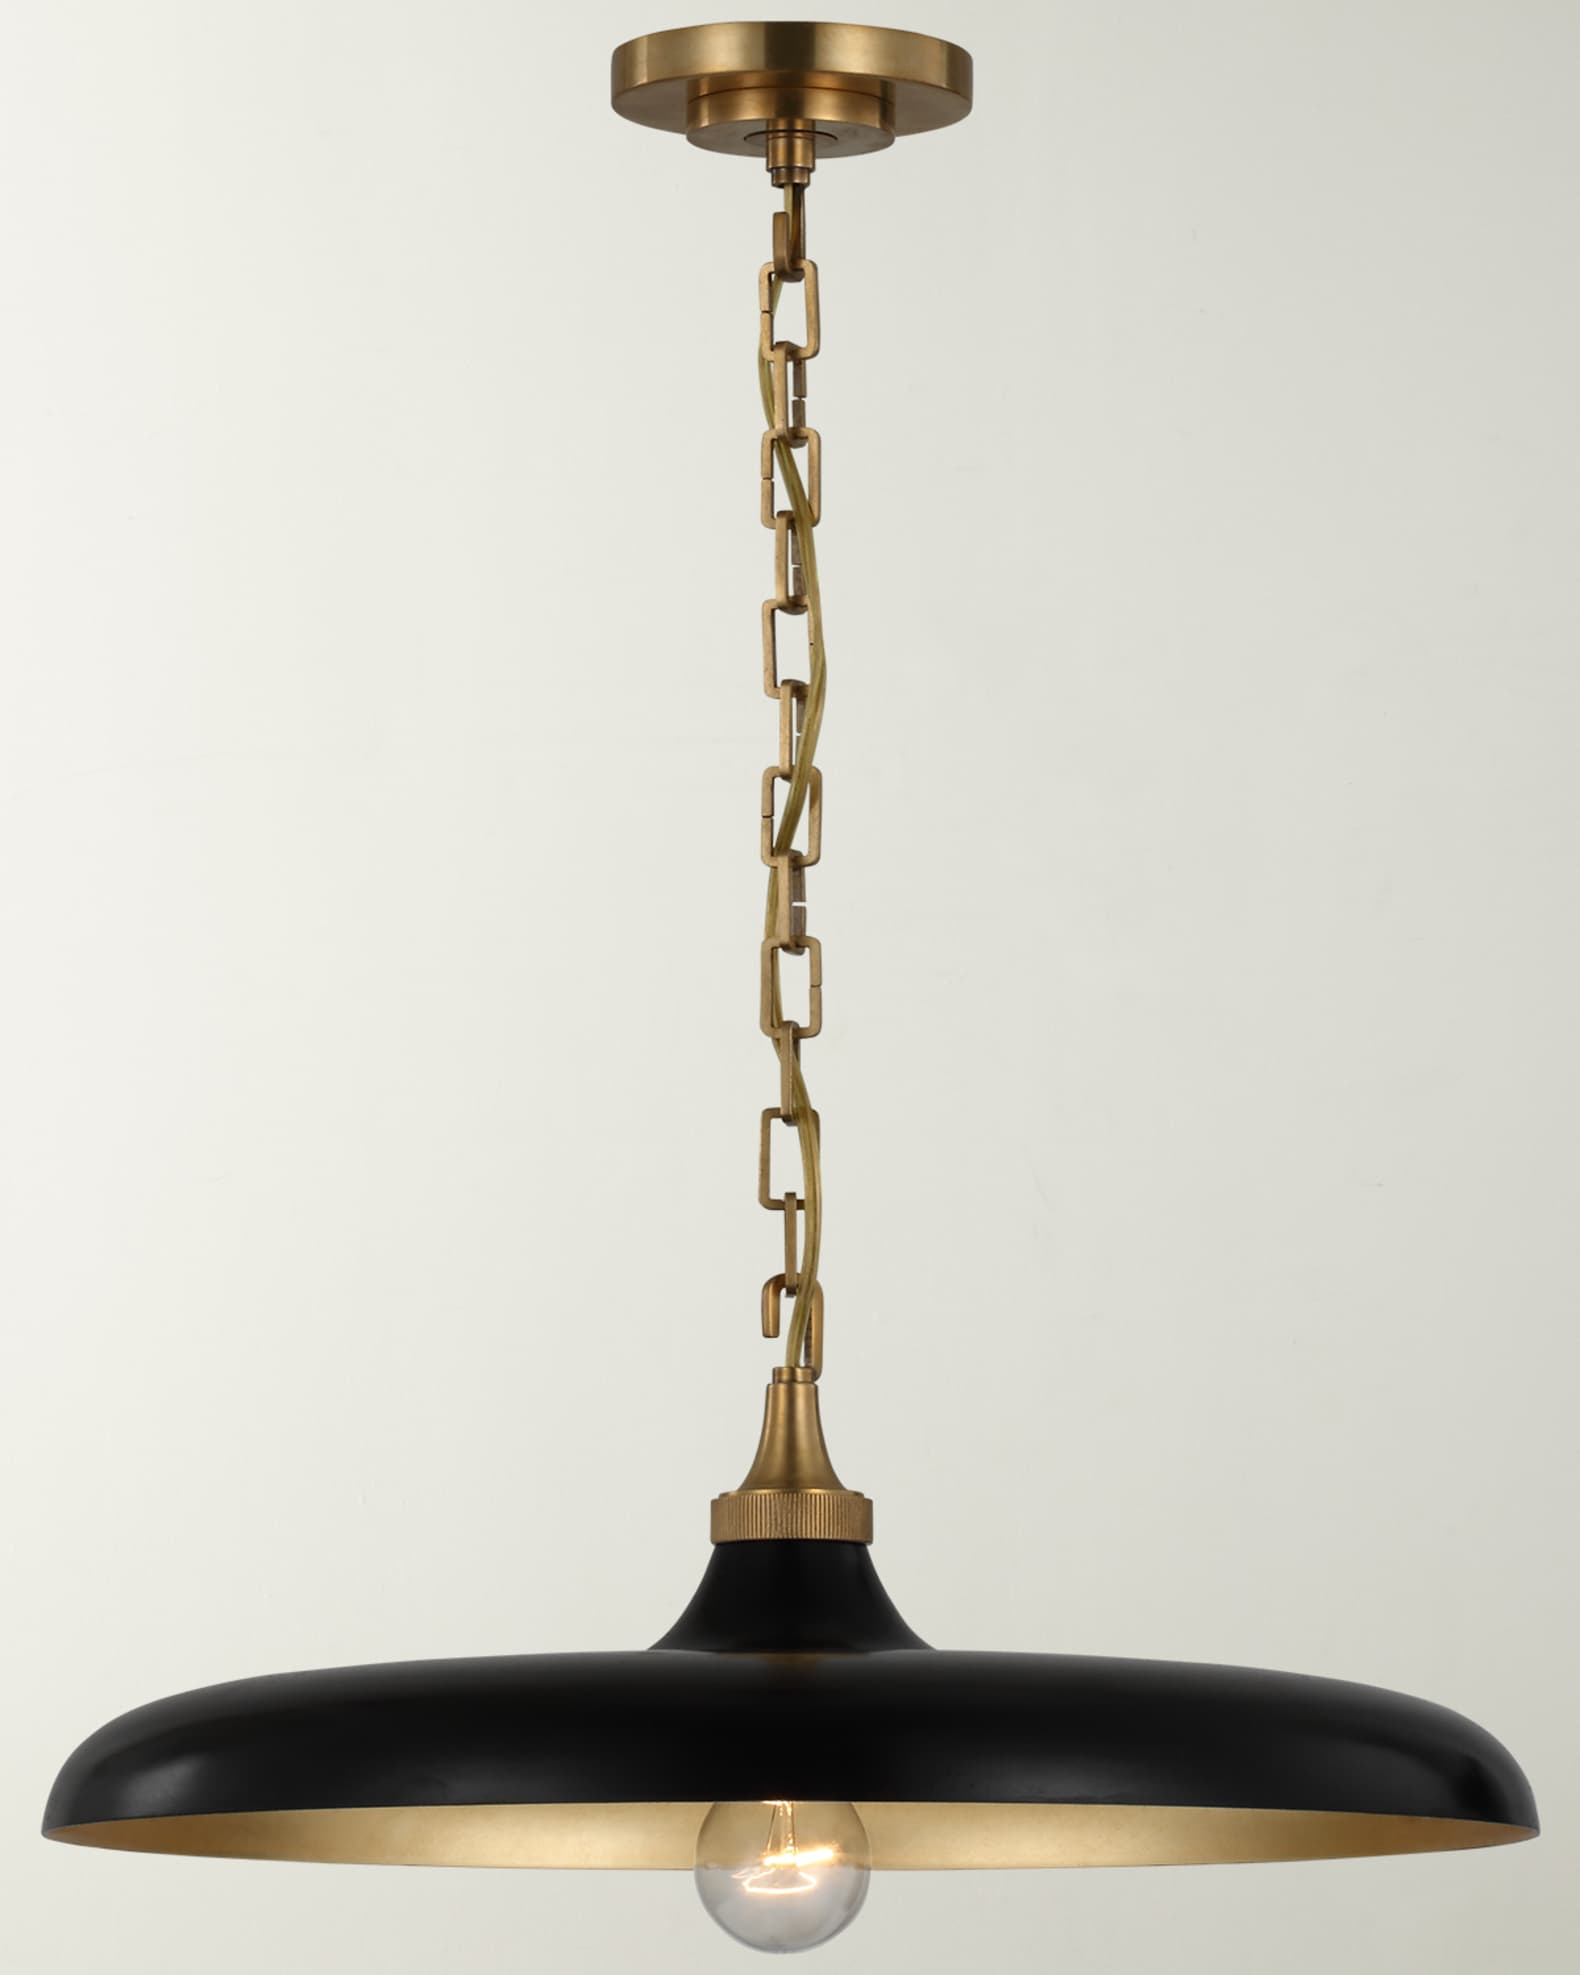 Visual Comfort Signature Piatto Medium Pendant In Hand-Rubbed Antique Brass  With Aged Iron Shade By Thomas O'Brien